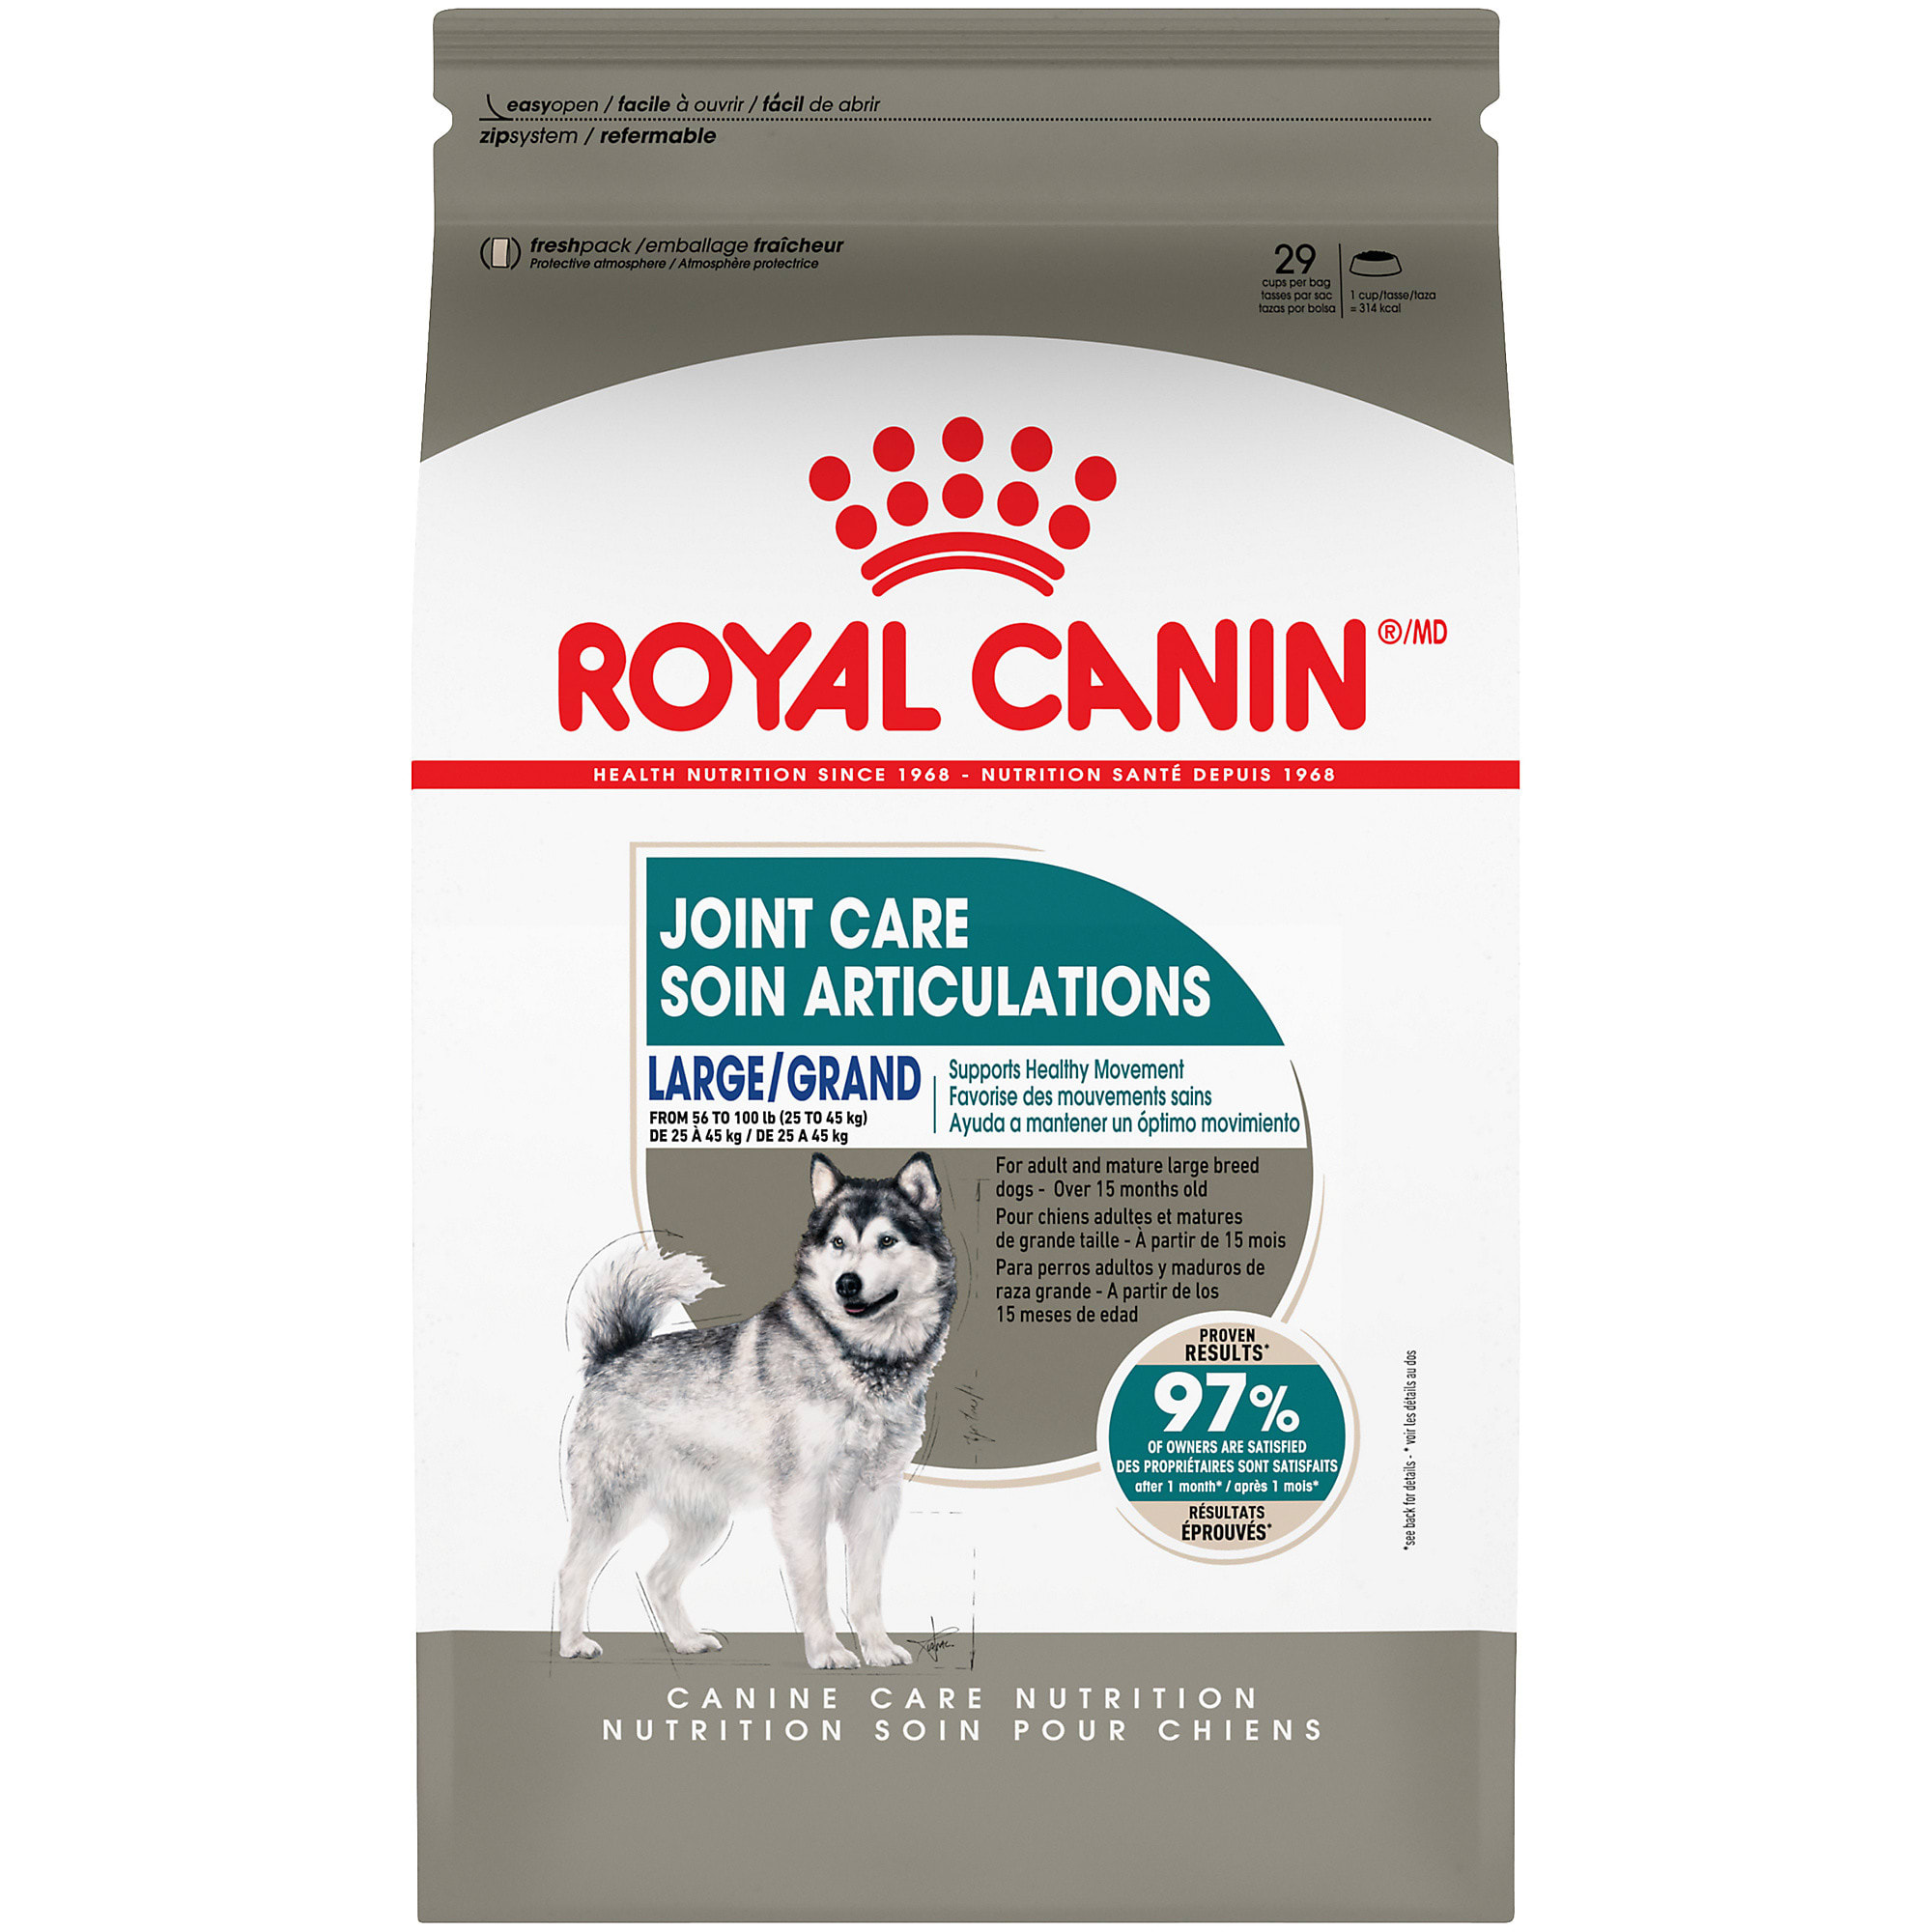 royal canin joint